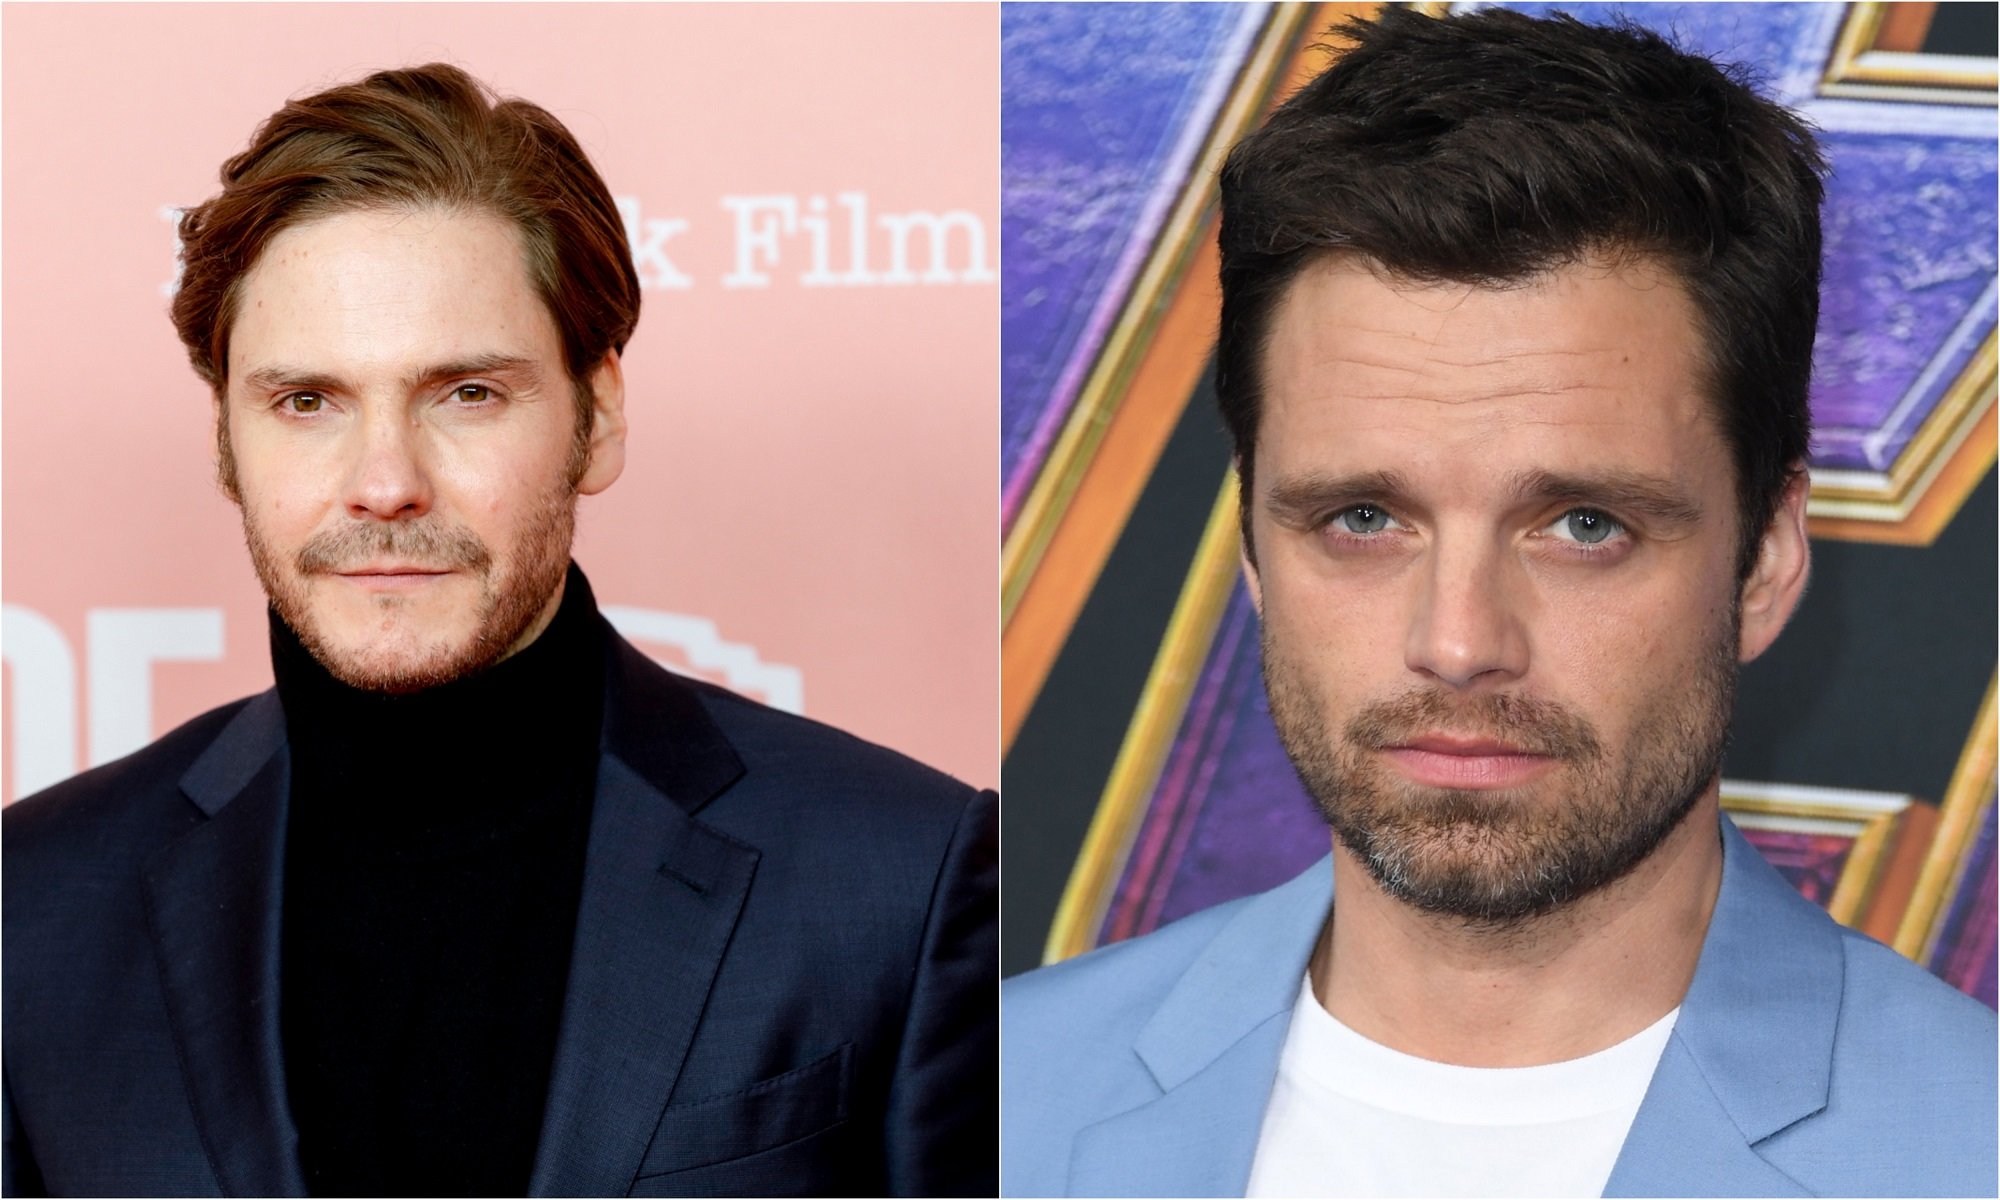 Daniel Brühl at the 'My Zoe' premiere in 2019 and Sebastian Stan at the 'Avengers: Endgame' premiere in 2019